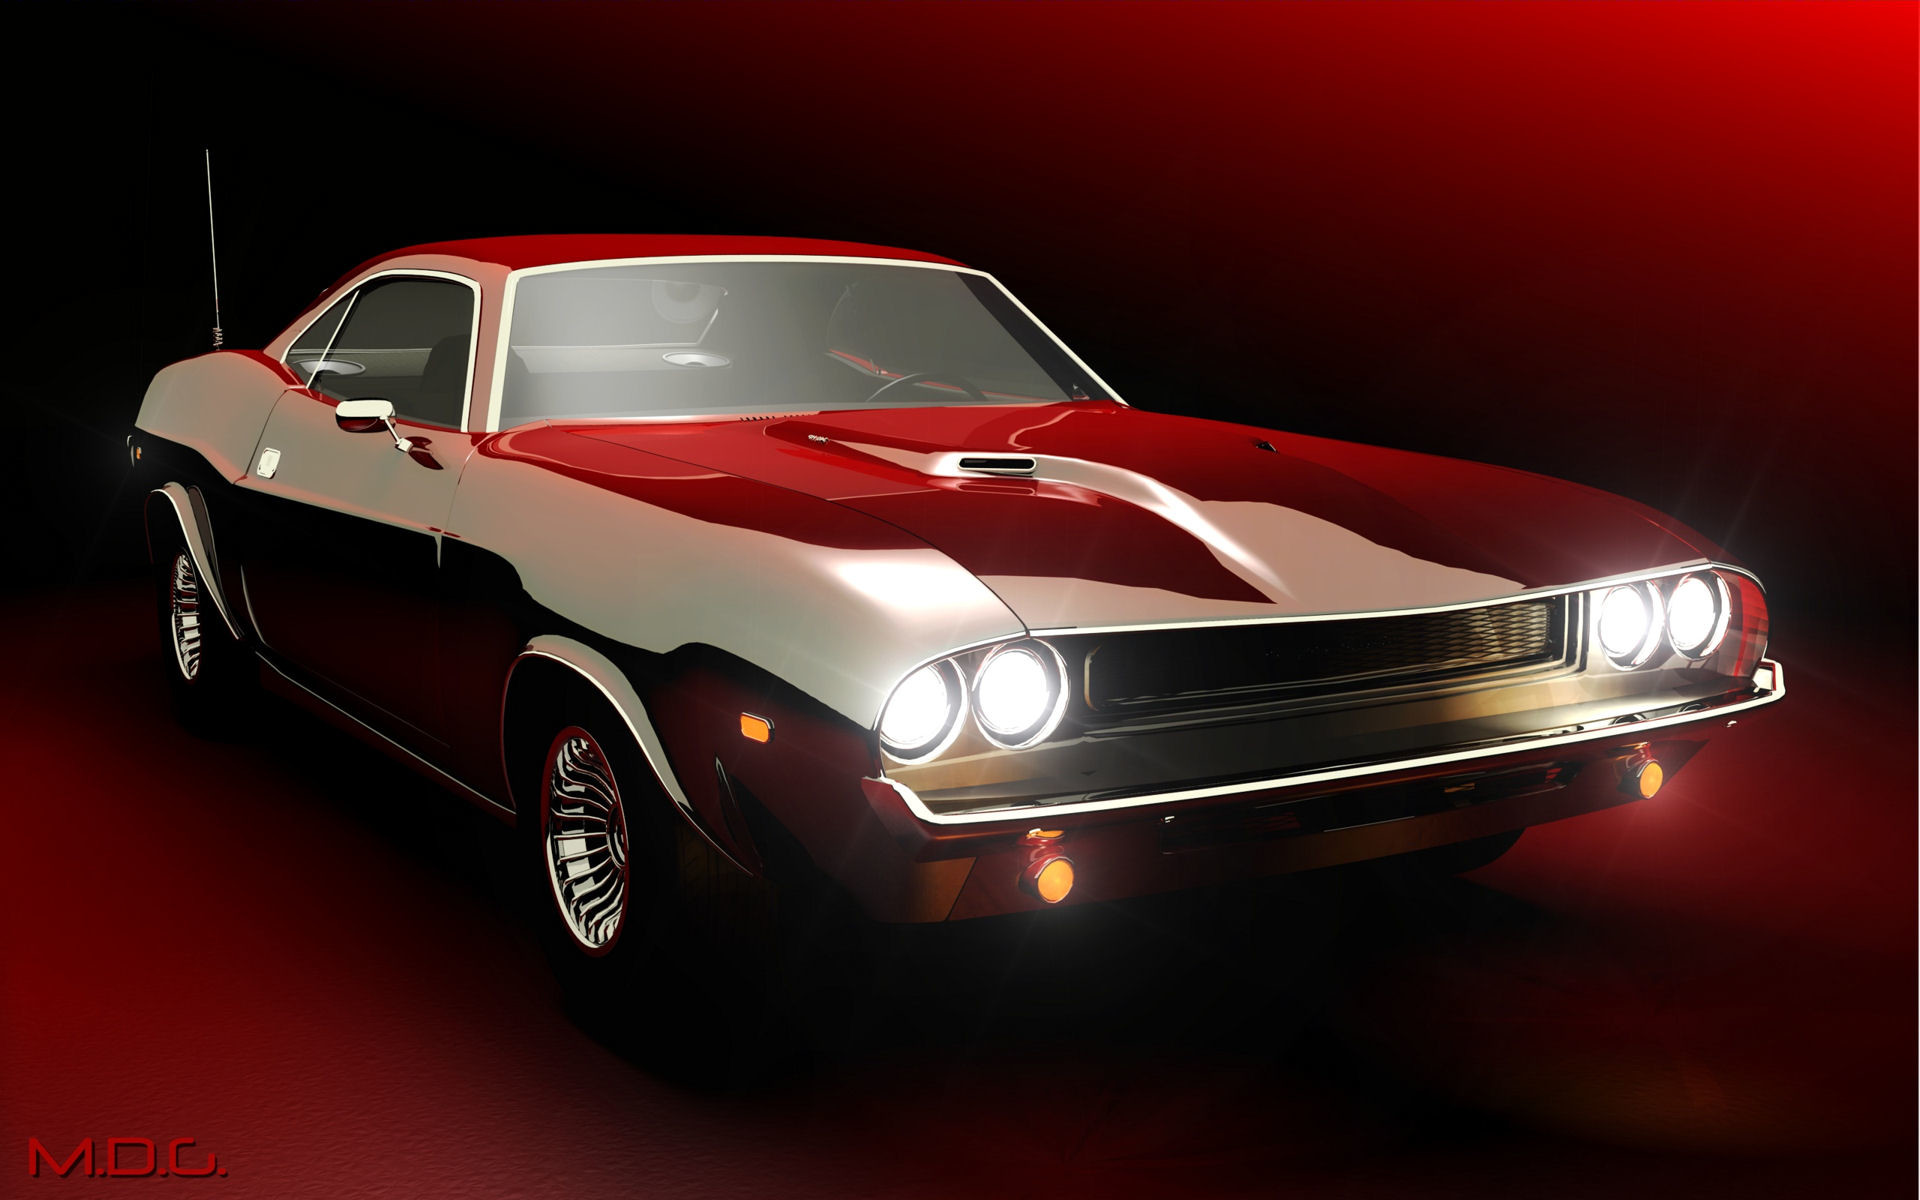 1920x1200 Muscle Car Wallpapers For Desktop 5381 Hd Wallpapers in Cars .